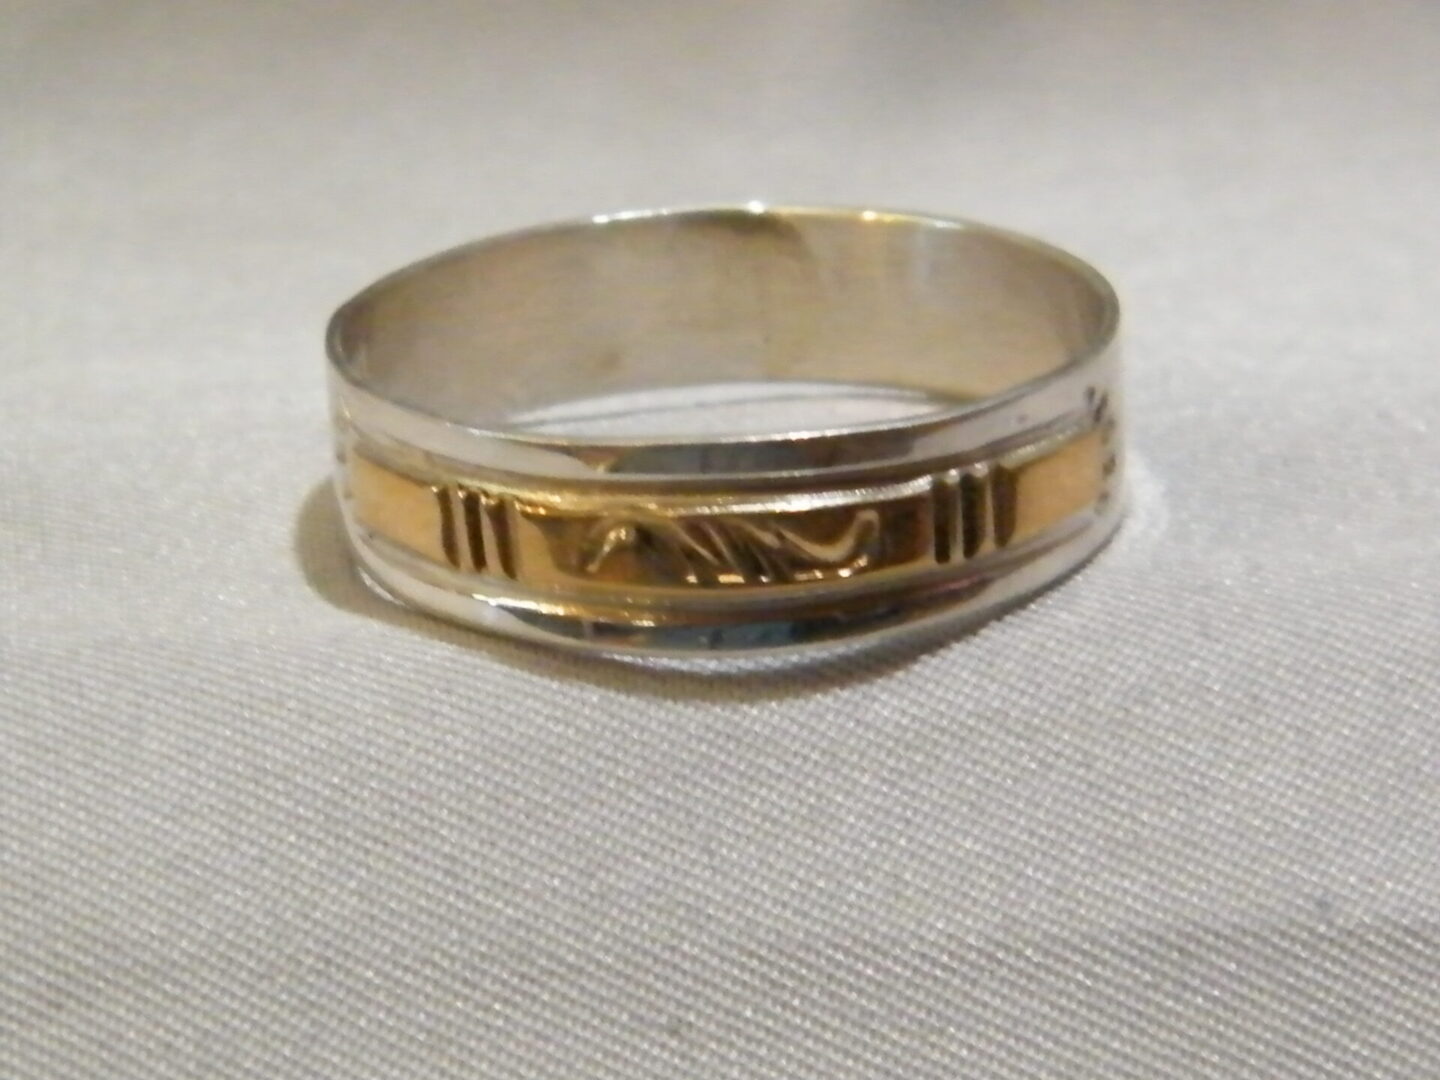 A Silver Color Ring With a Gold Band